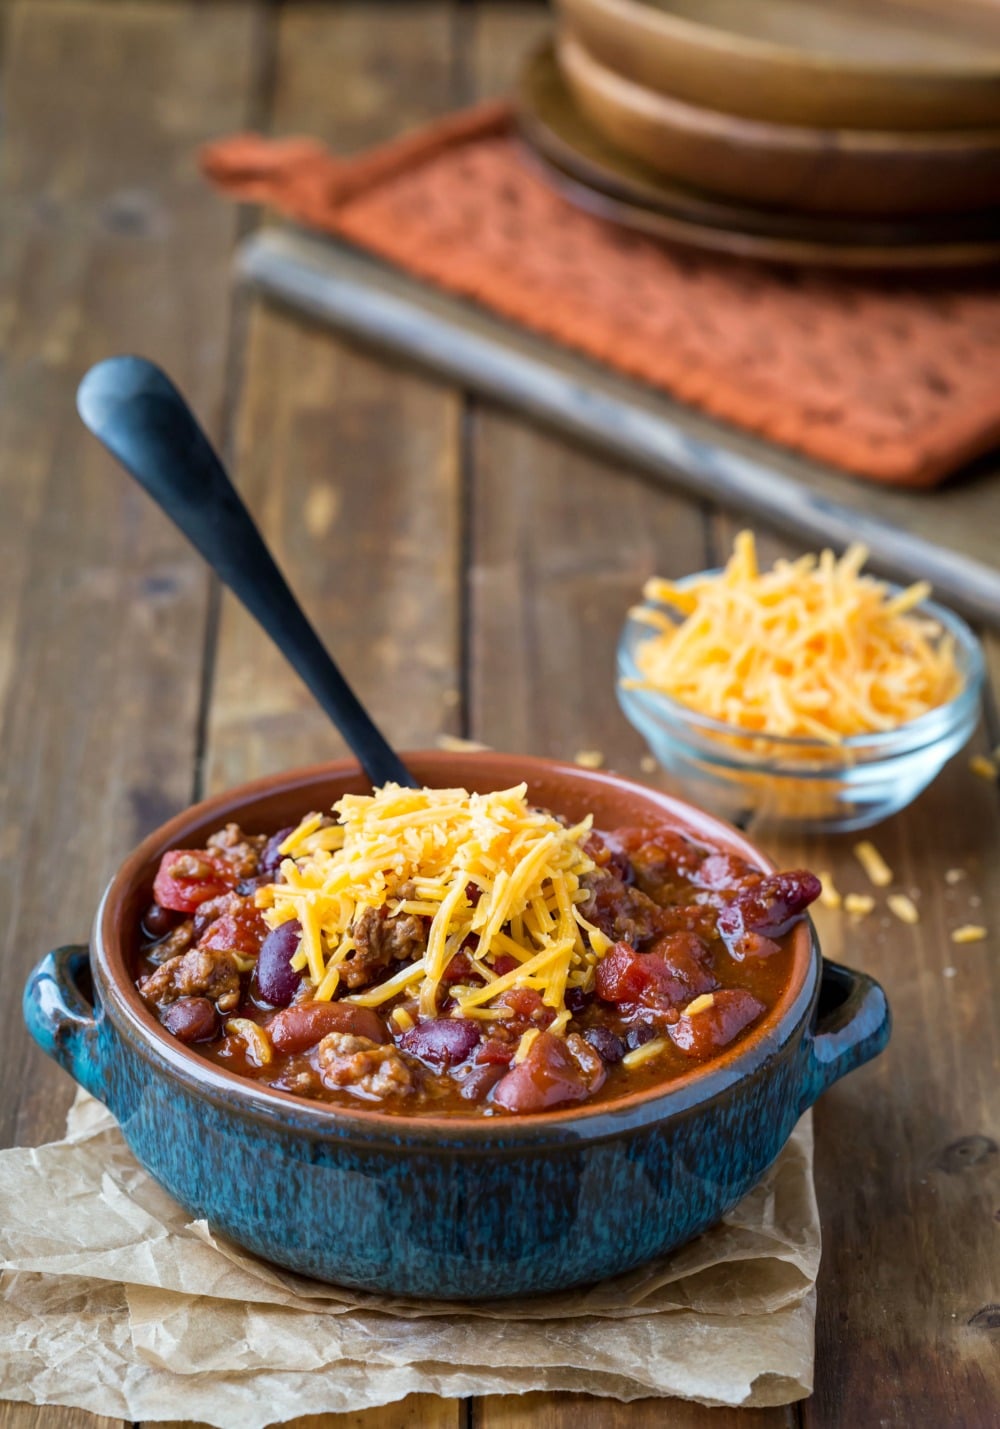 Barbecue Chili topped with shredded cheddar cheese